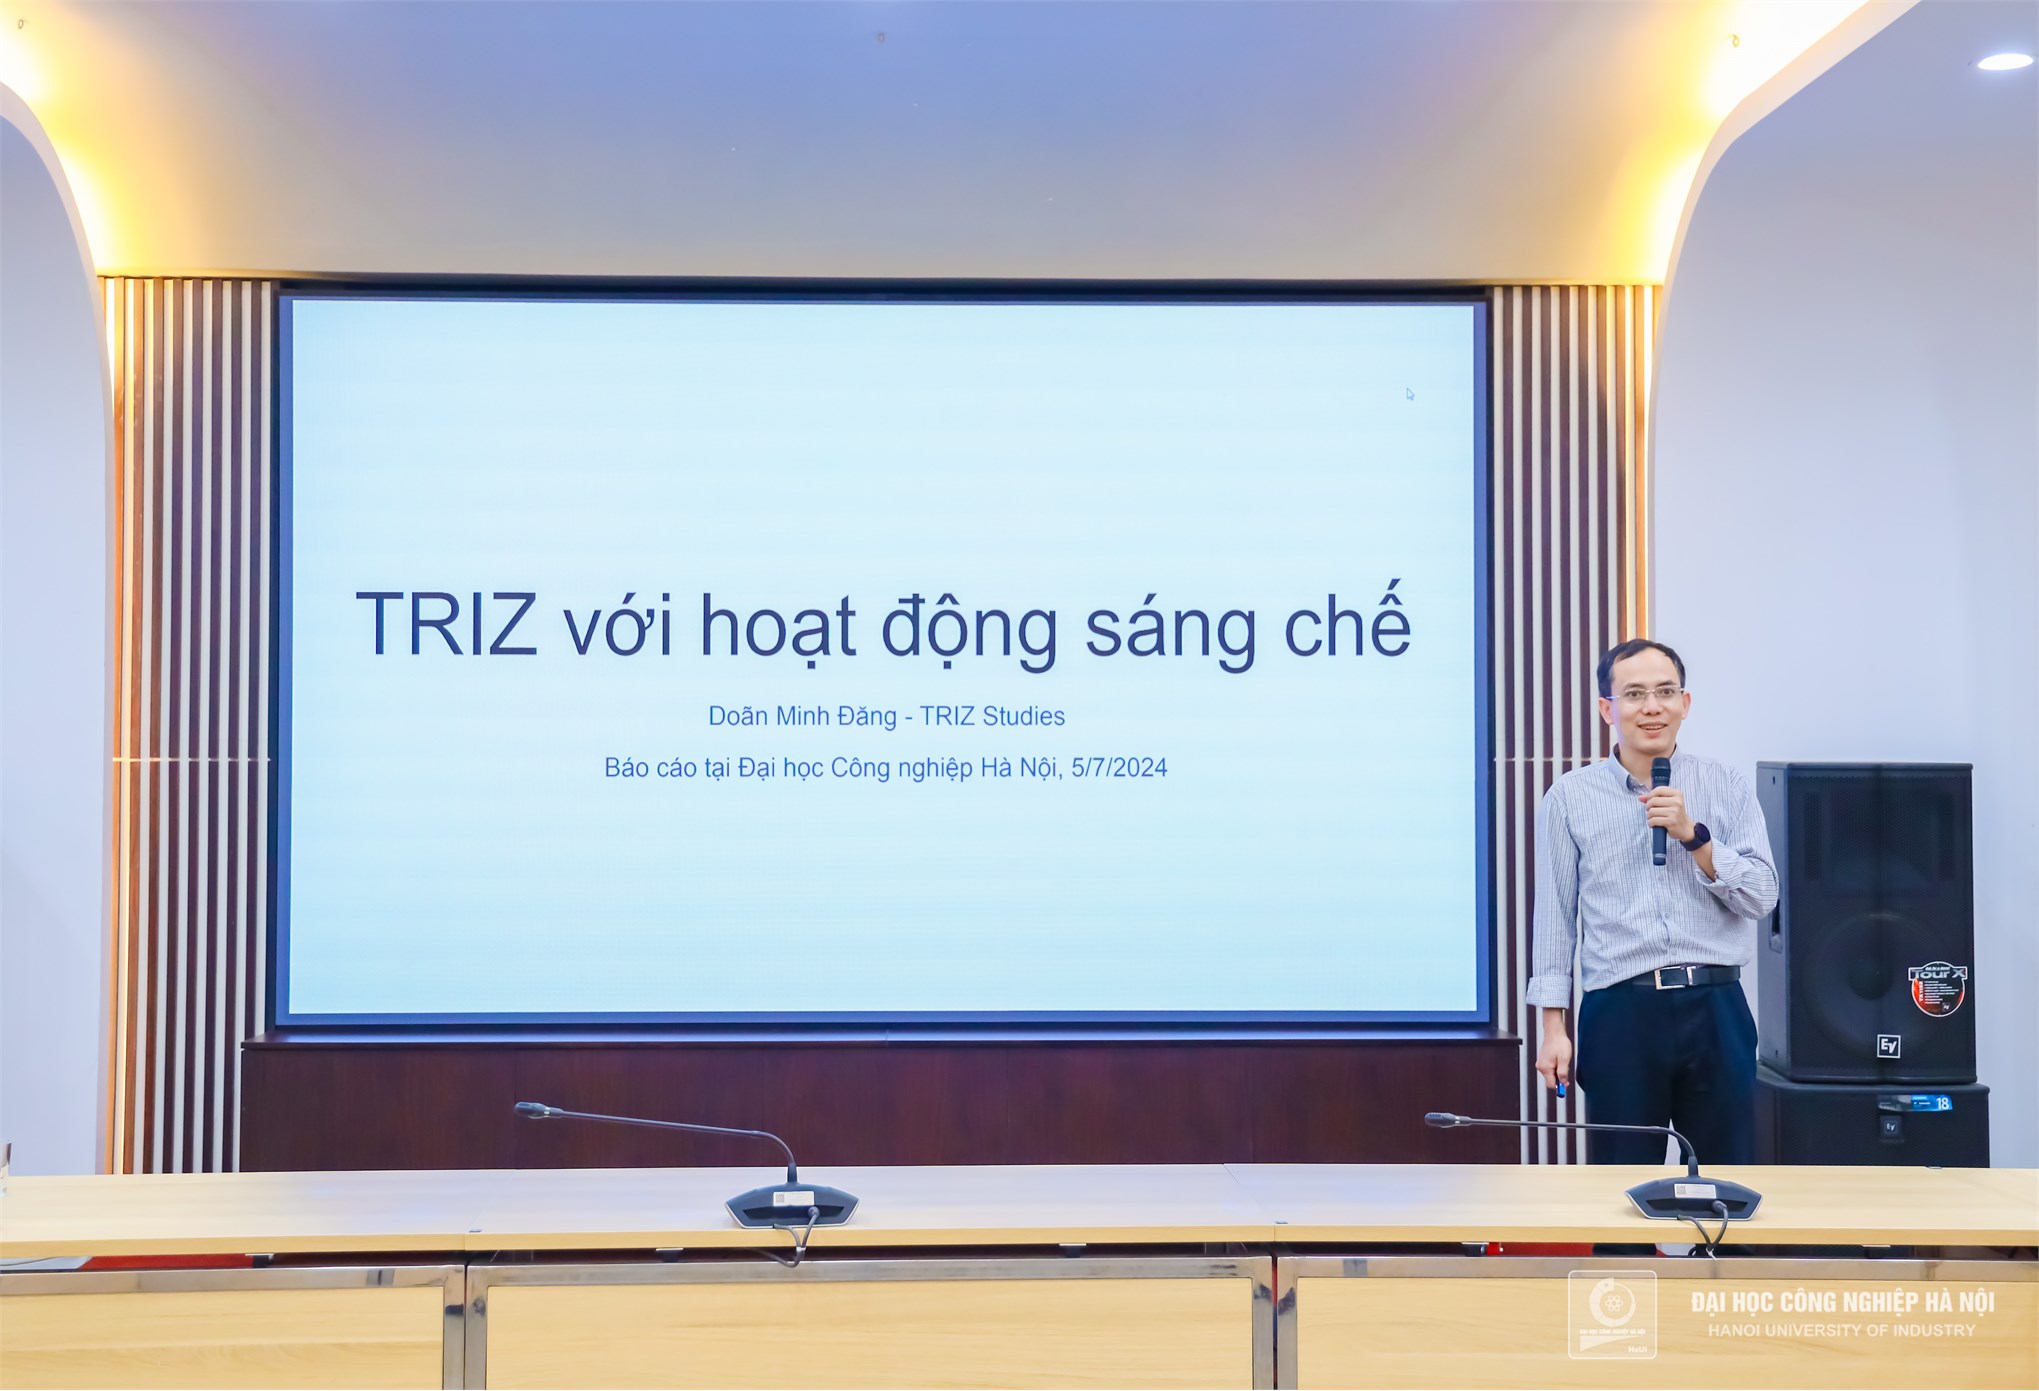 Scientific Workshop on Invention Activities from the Perspective of TRIZ